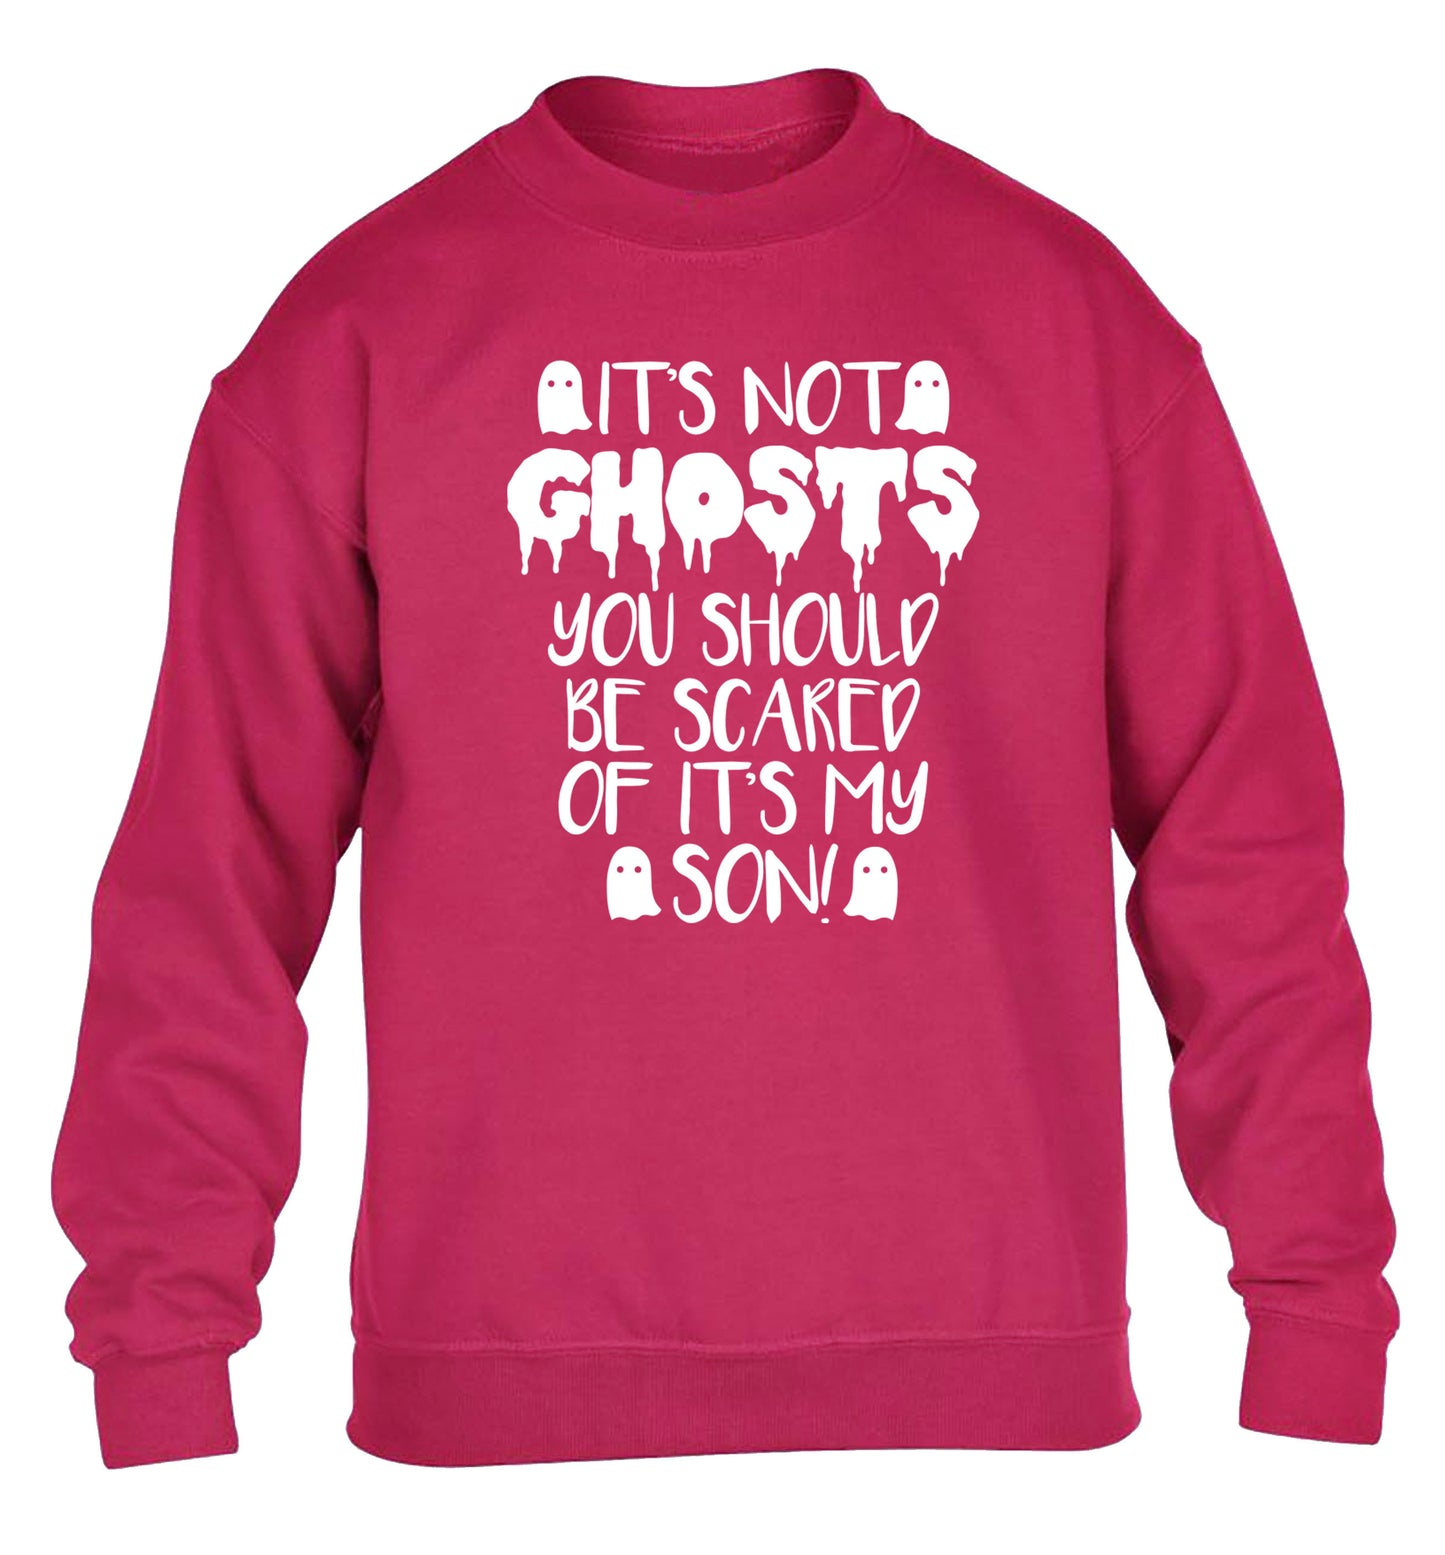 It's not ghosts you should be scared of it's my son! children's pink sweater 12-14 Years